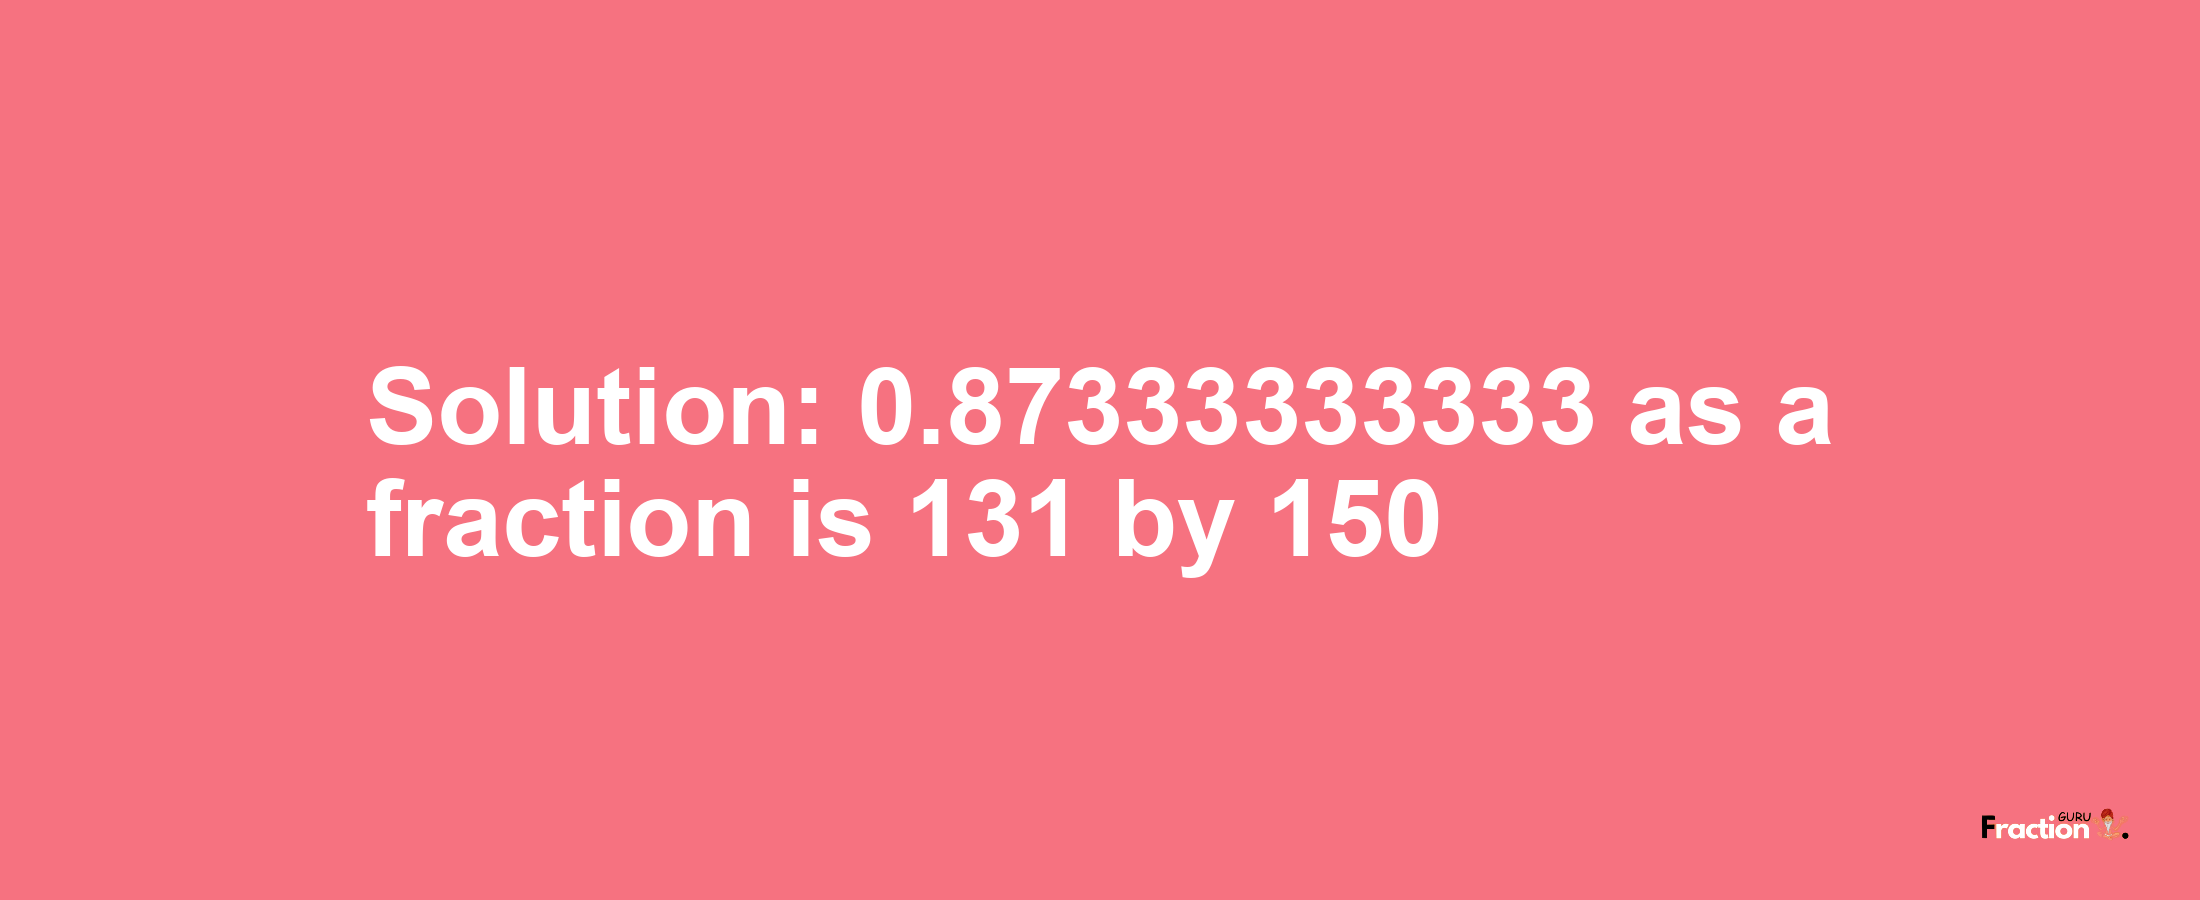 Solution:0.87333333333 as a fraction is 131/150